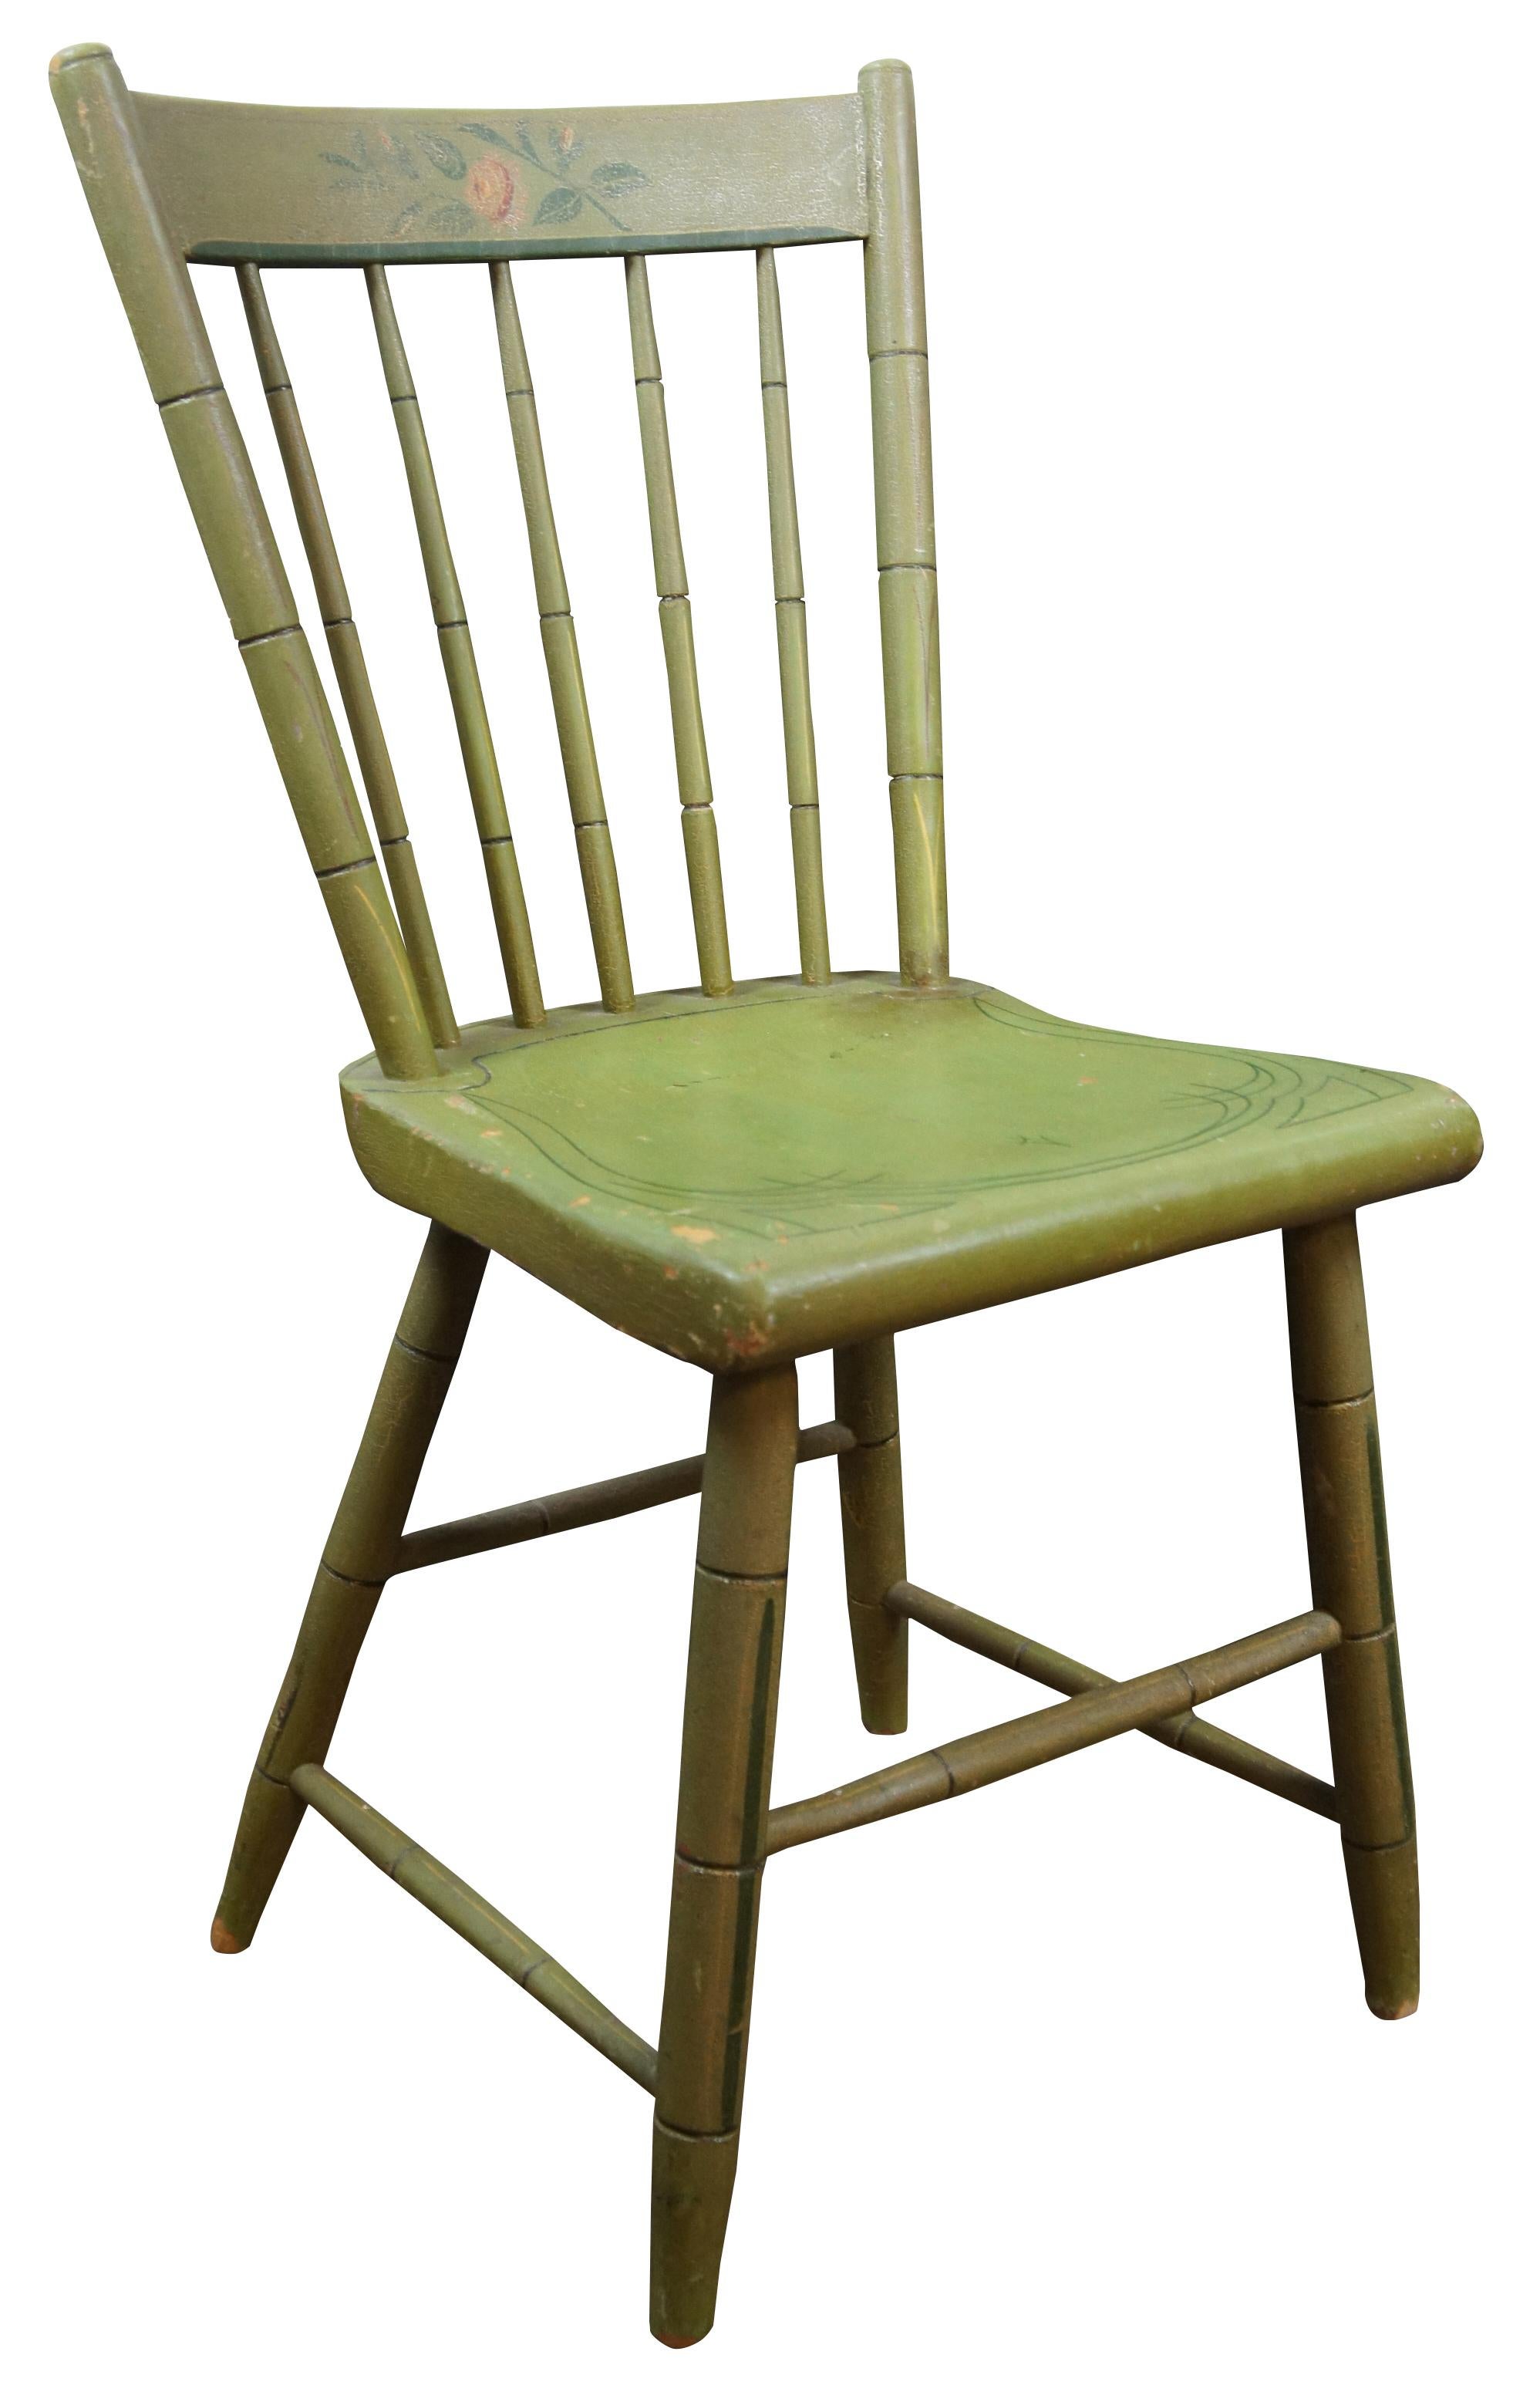 Antique Hitchcock style Windsor spindle back side chair painted green with a pink rose accent.
  